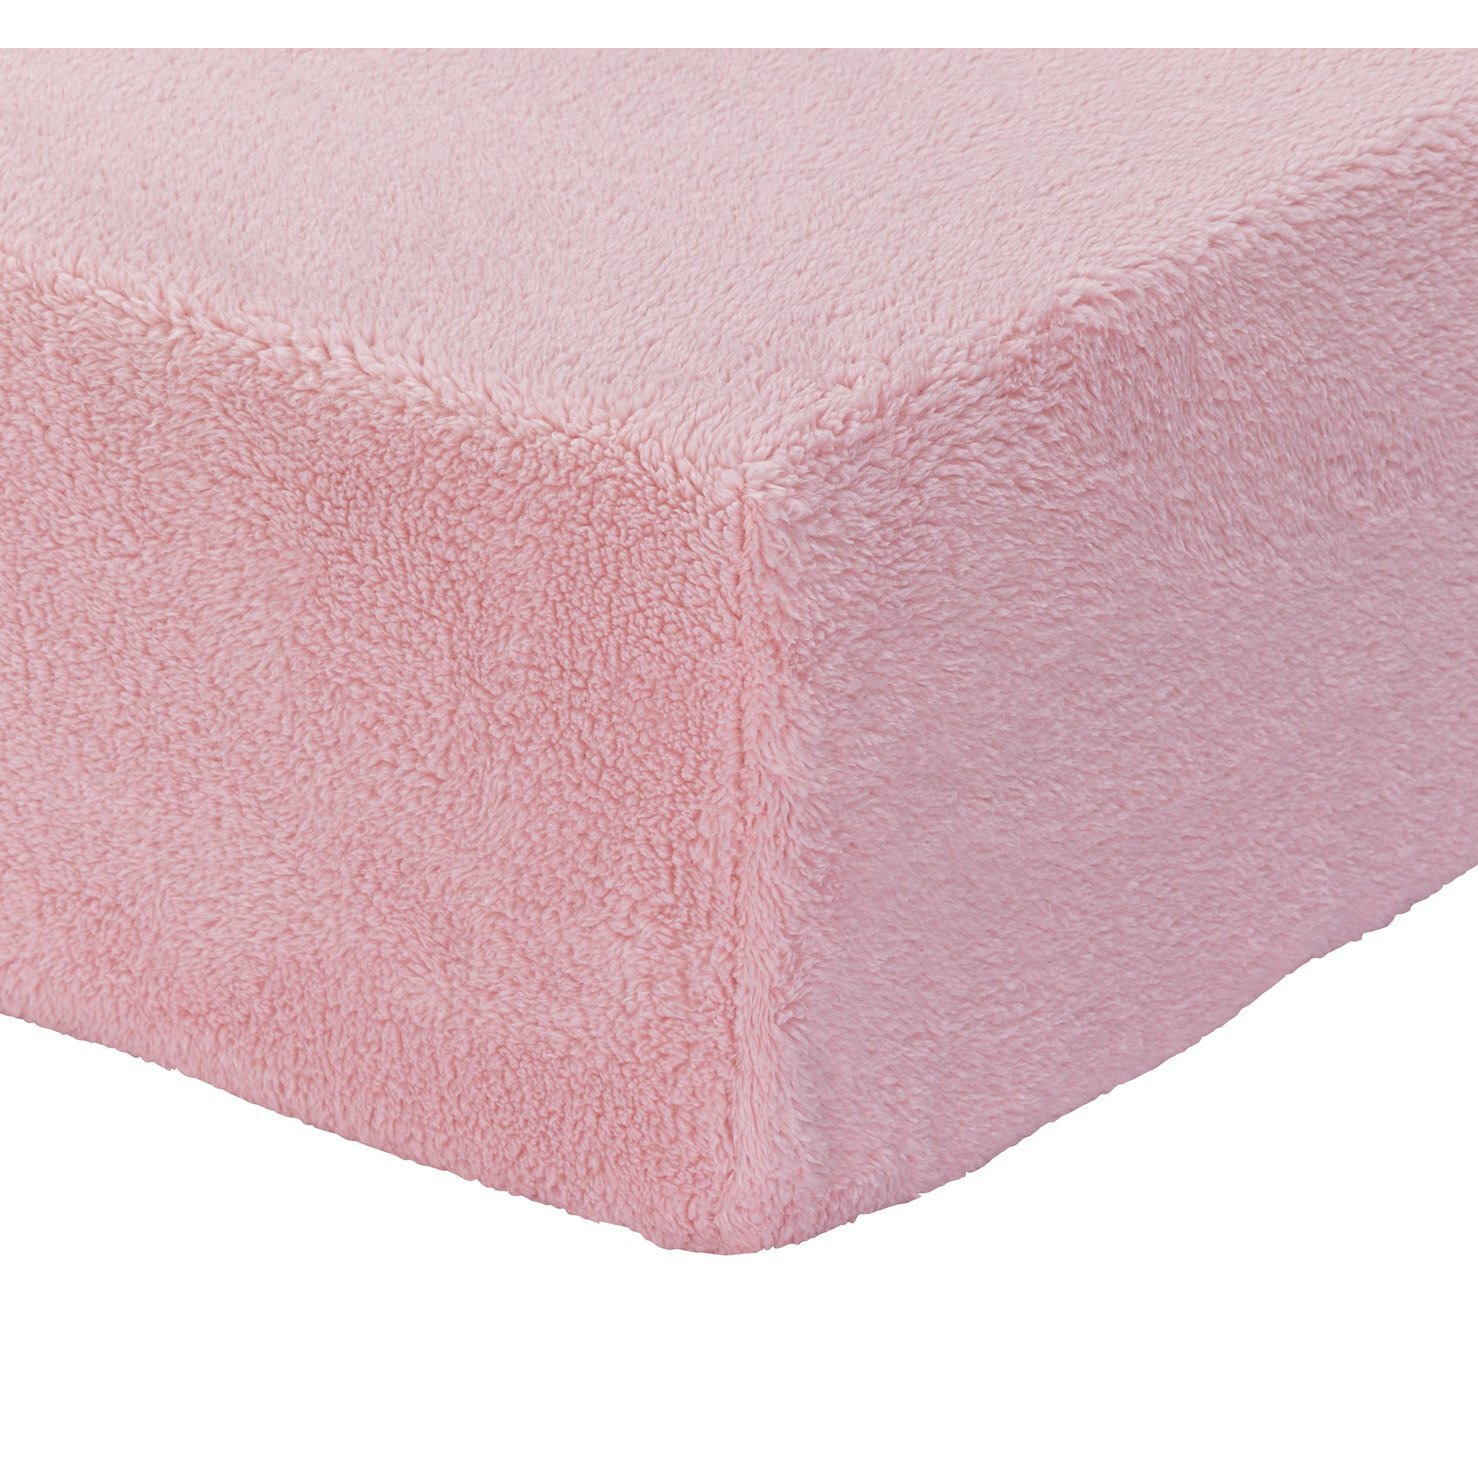 Argos Home Fleece Pale Pink Fitted Sheet - Double - image 1